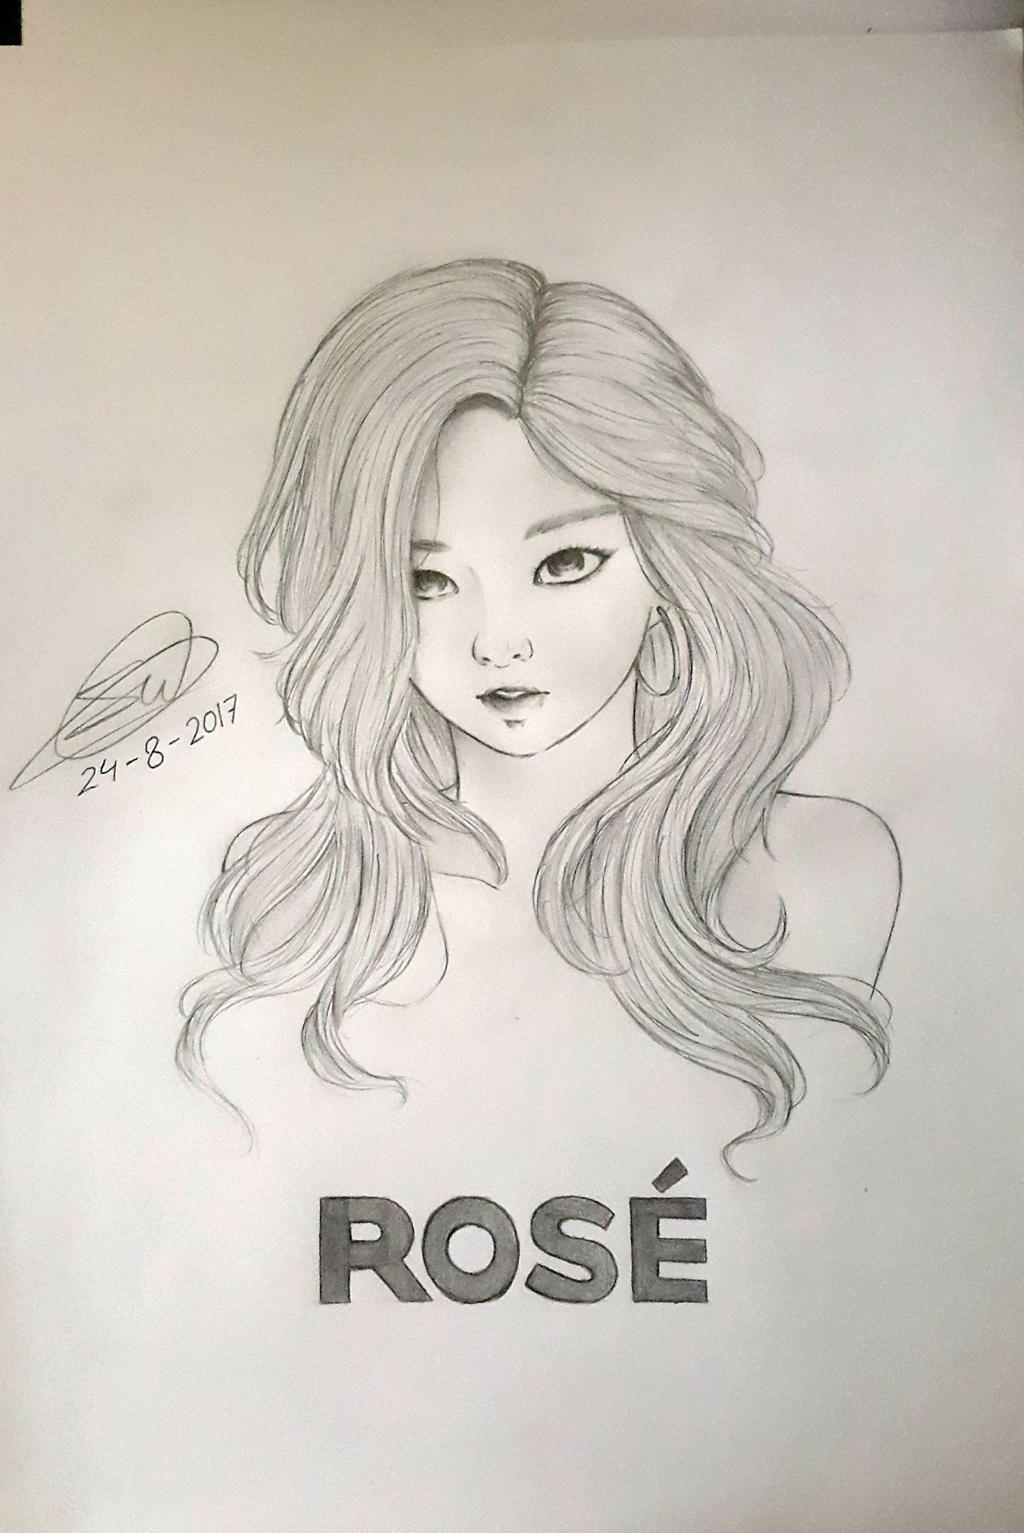 easy blackpink drawing rose Blackpink rose shared her drawing for the